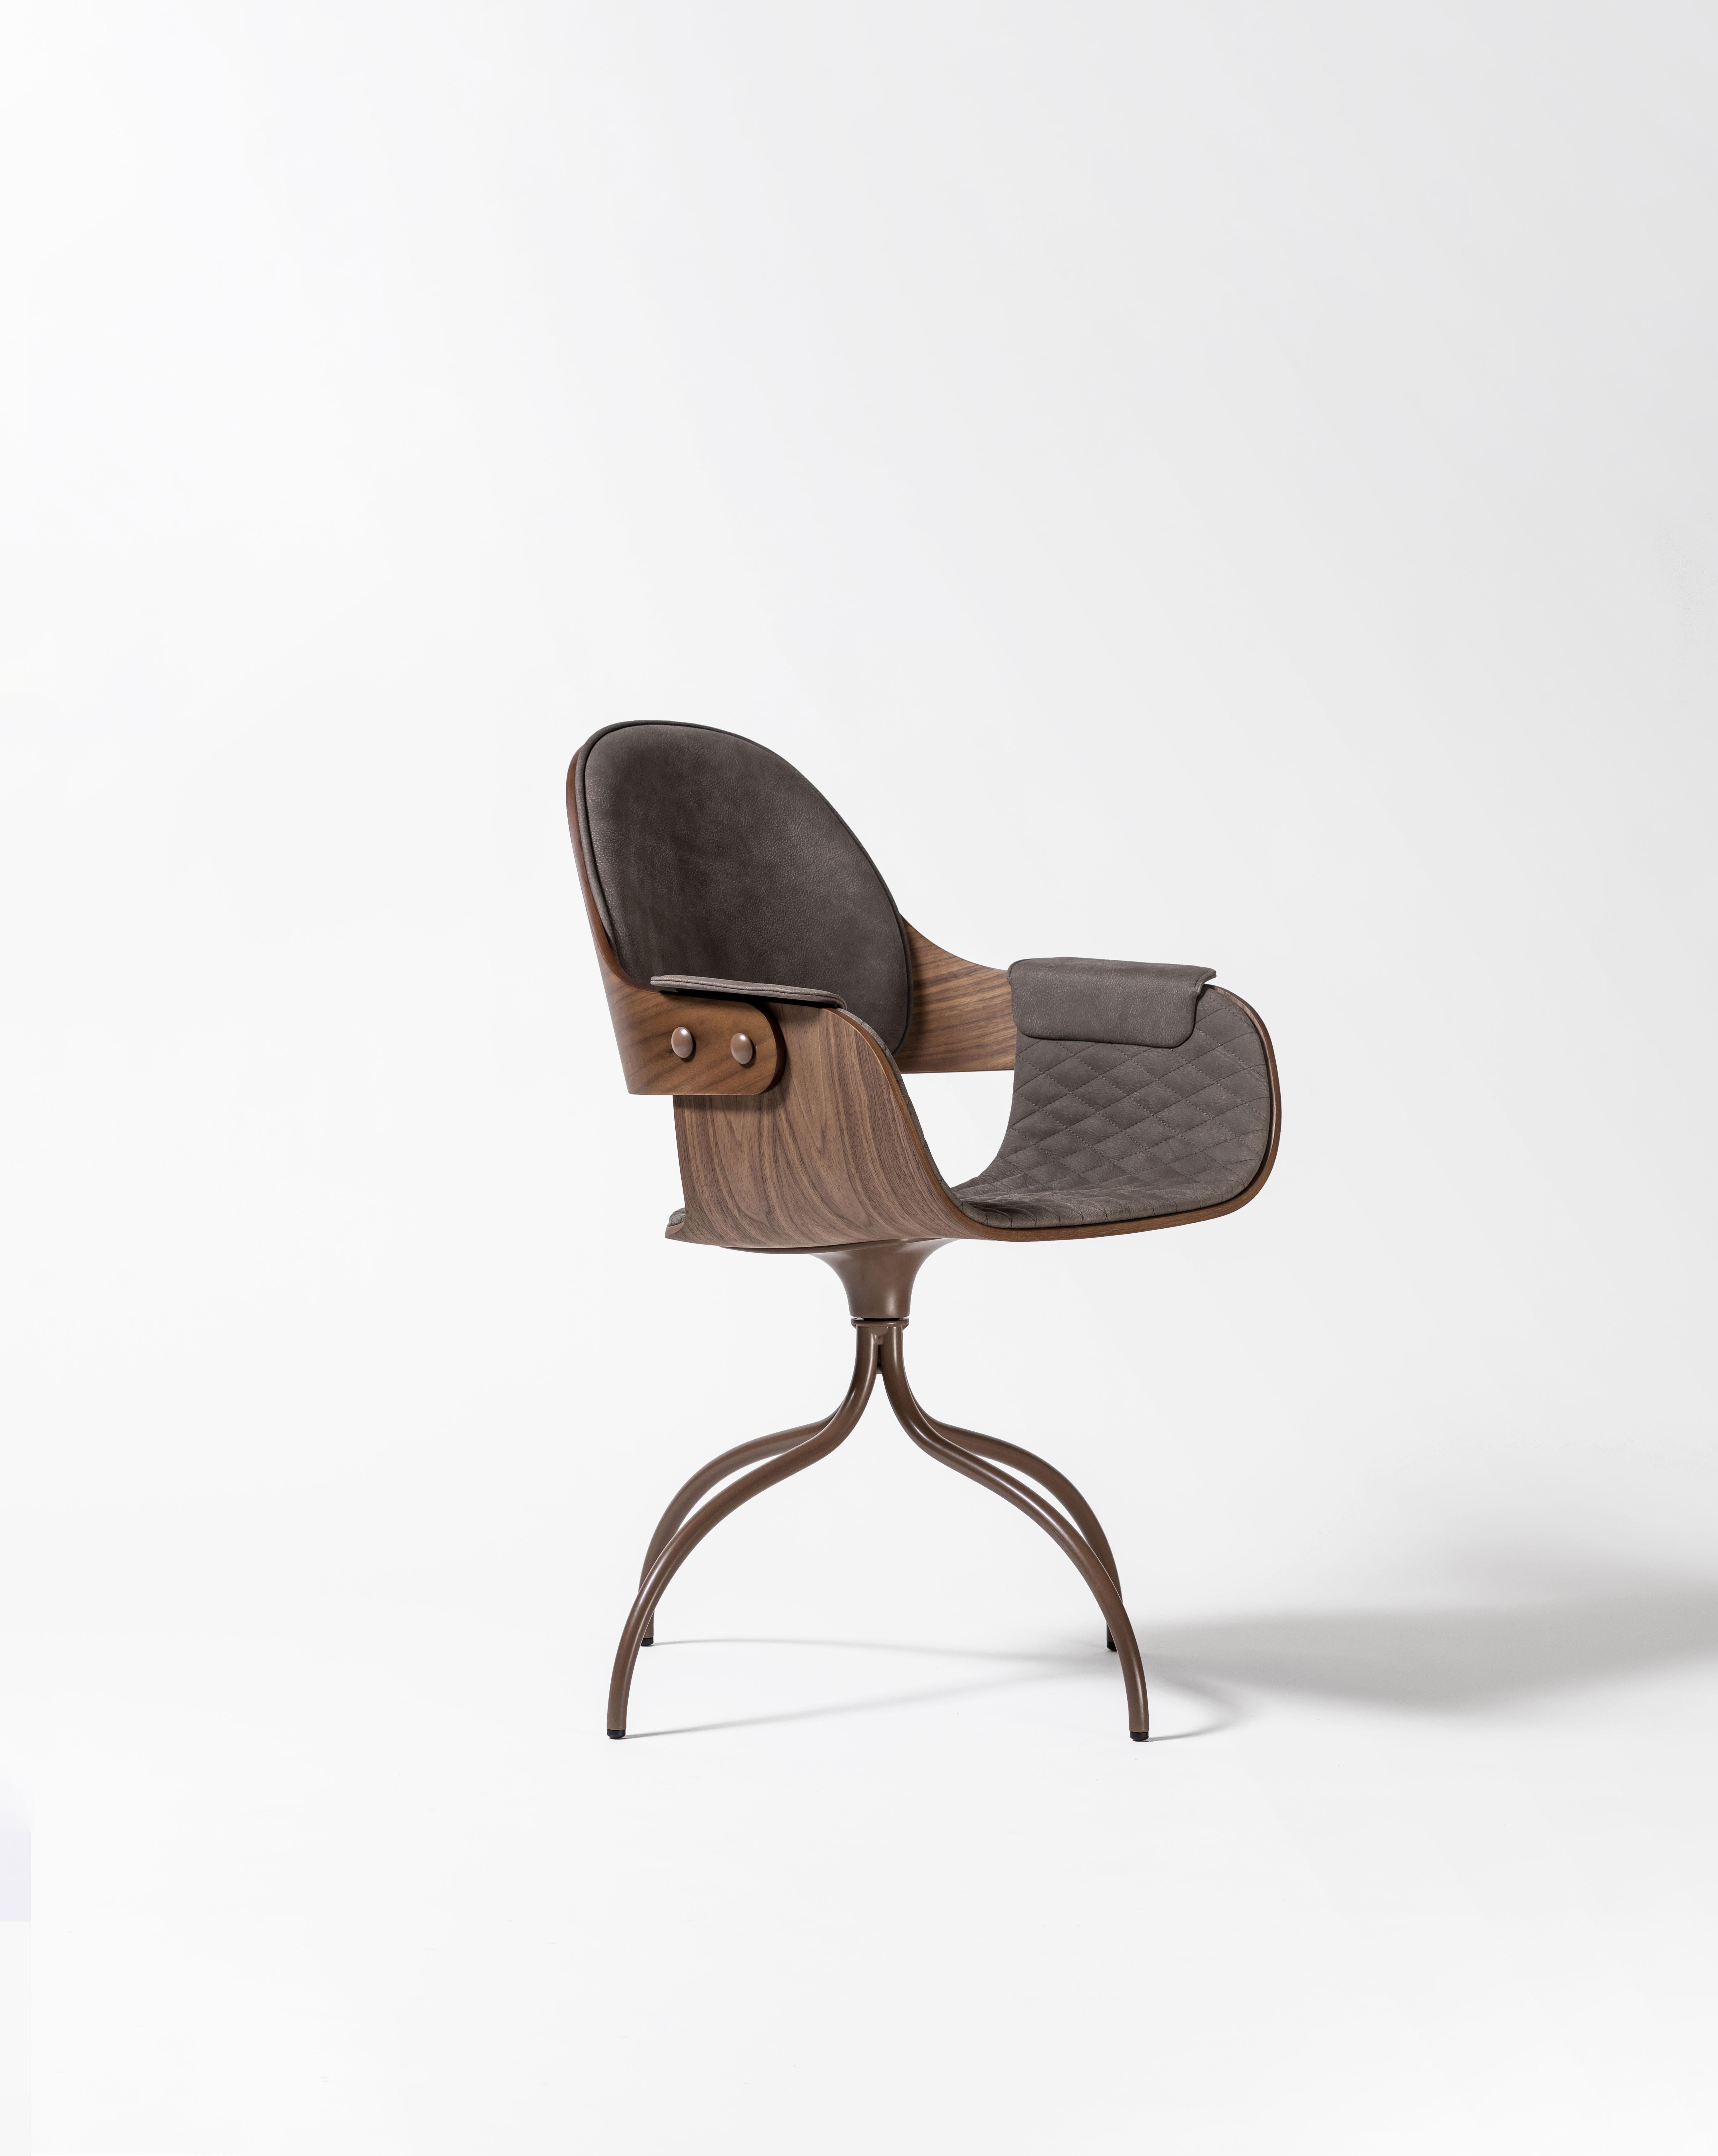 Swivel showtime chair by Jaime Hayon 
Dimensions: D 65 x W 55 x H 86 cm 
Materials: Powder coated steel or aluminium structure. Legs, seat and backrest in plywood with exteriors in natural ash, walnut or ash stained black. Metallic decorative